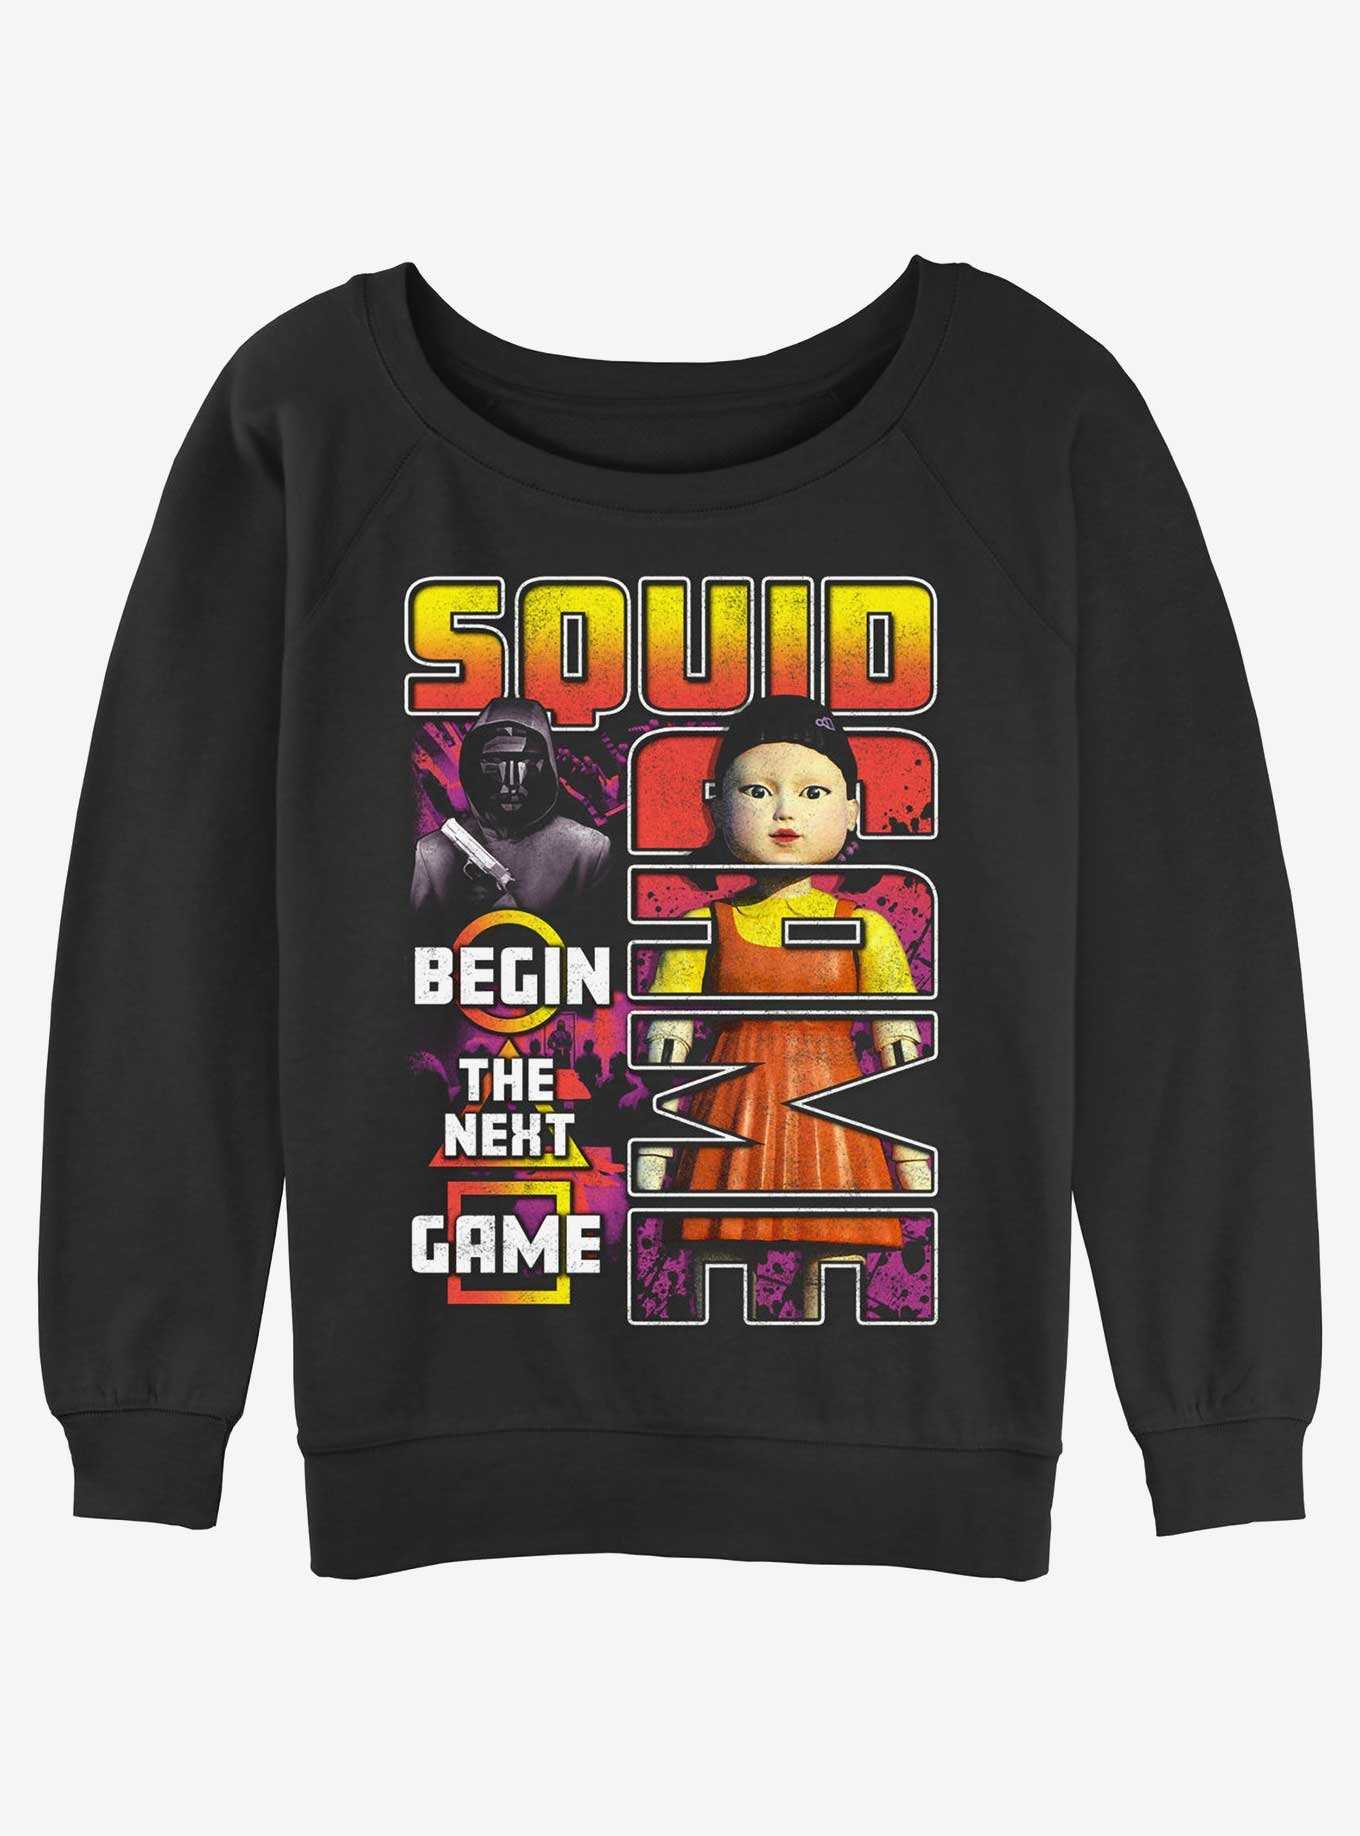 Squid Game Masked Man and Young-Hee Doll Star The Next Game Girls Slouchy Sweatshirt, , hi-res